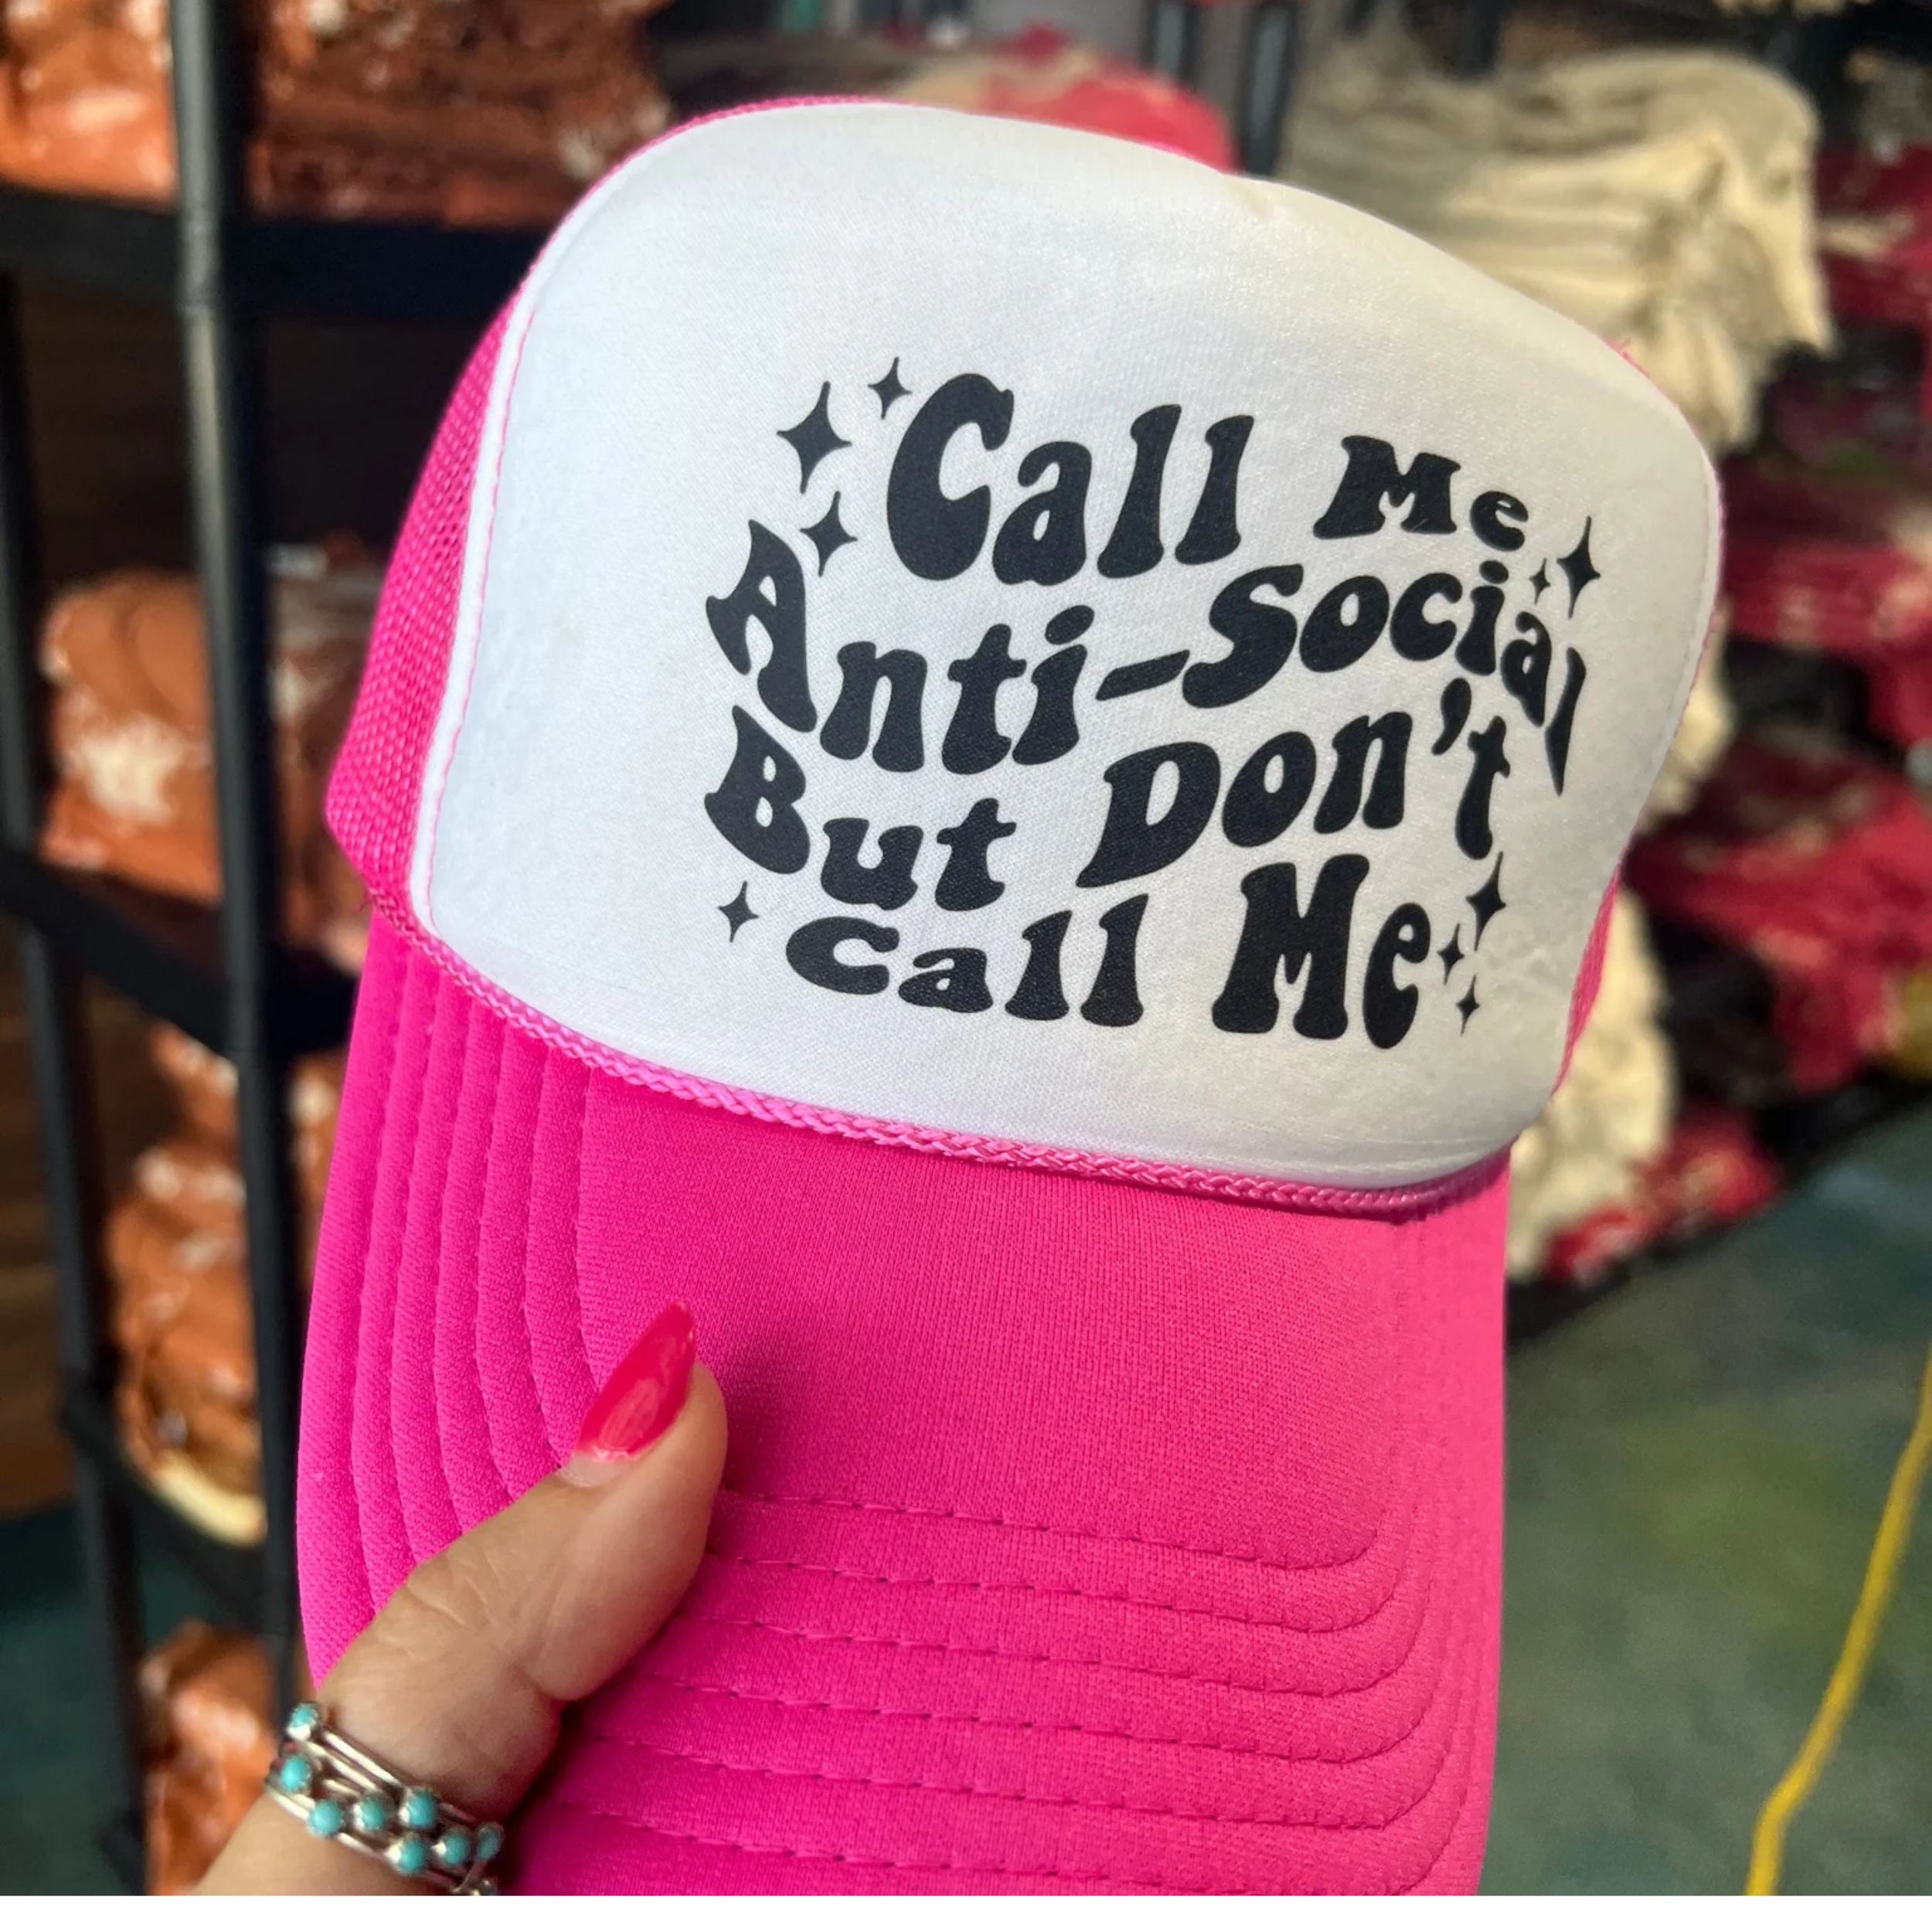 In the picture is a foam trucker hat that says call me anti-social but don't call me across the top in pink and white